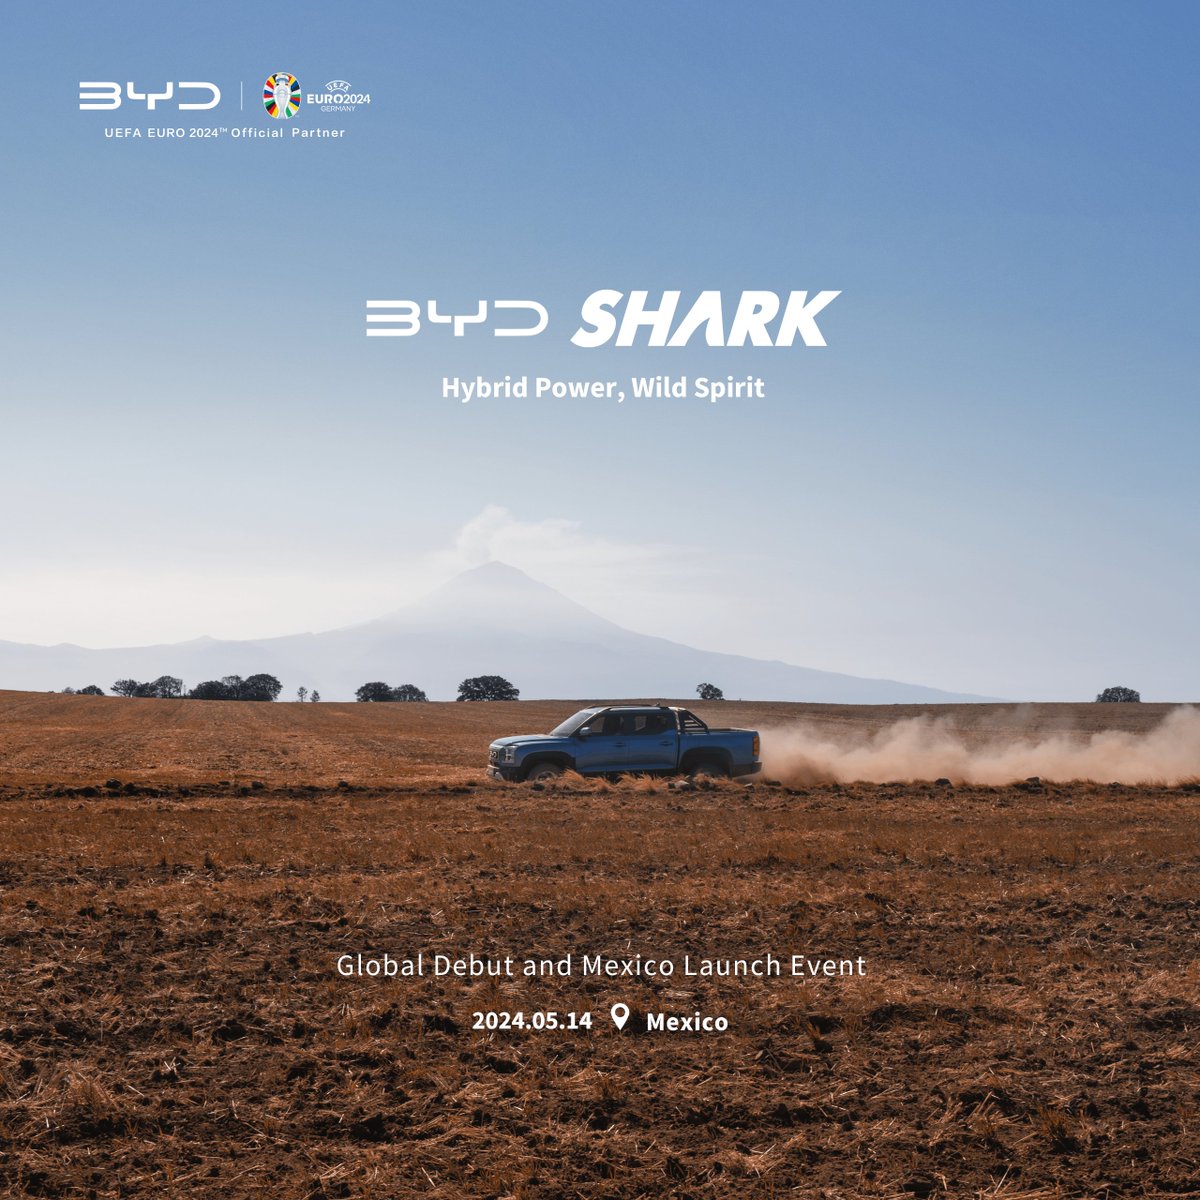 Get ready for BYD SHARK's global debut in Mexico City, Mexico, and witness the strength and innovation behind our new Pickup Truck.

Mark your calendars for May 14, 2024, it's here to redefine green mobility to the next level!

#BYD #BuildYourDreams #BYDSHARK